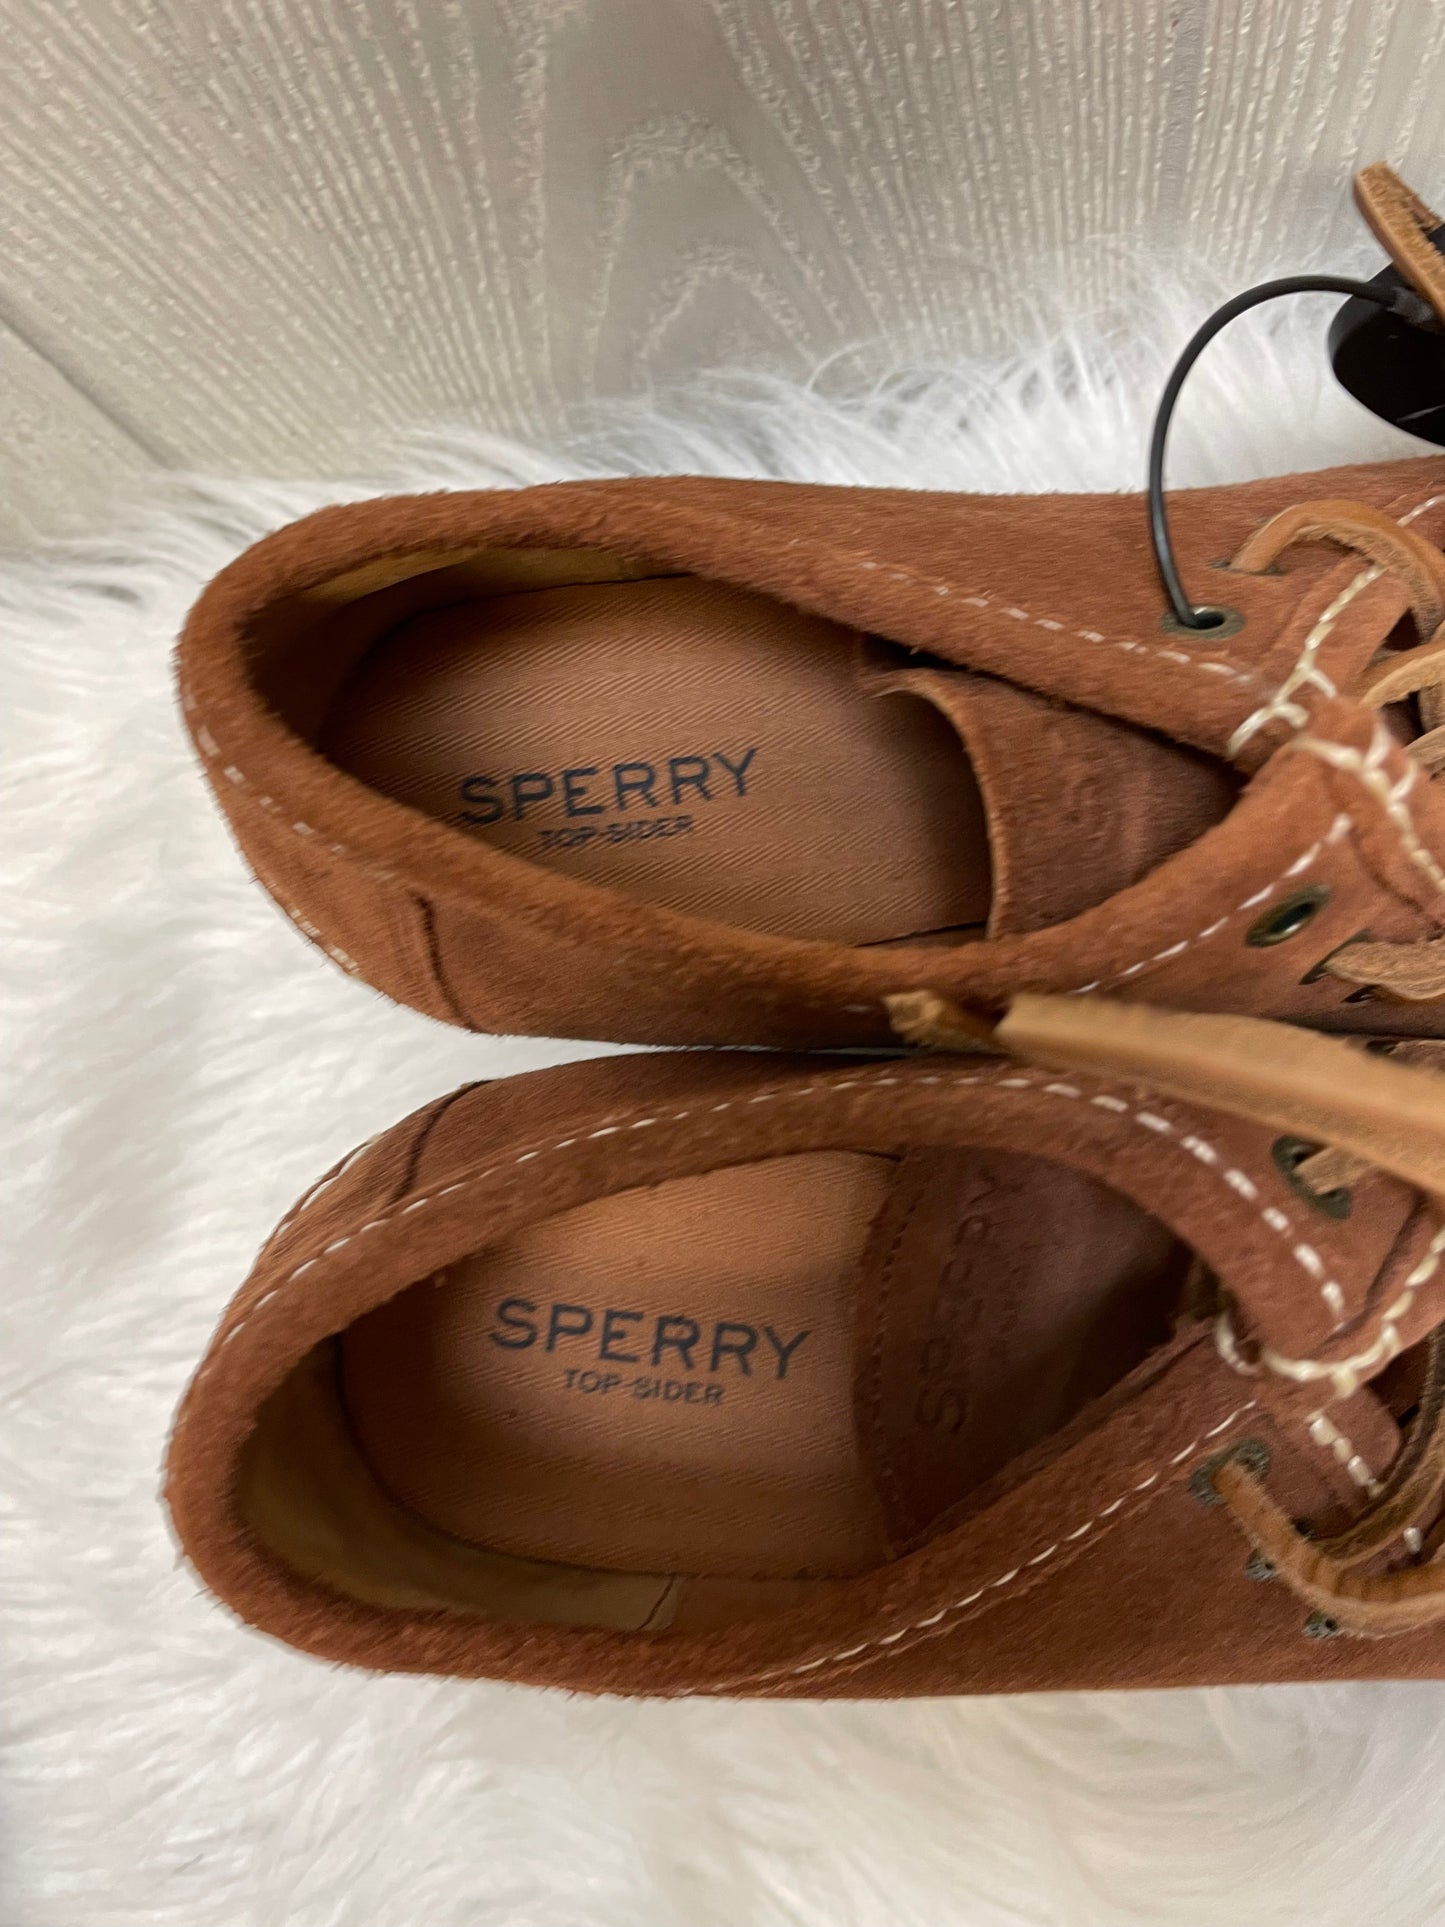 Brown Shoes Heels Wedge Sperry, Size 8.5